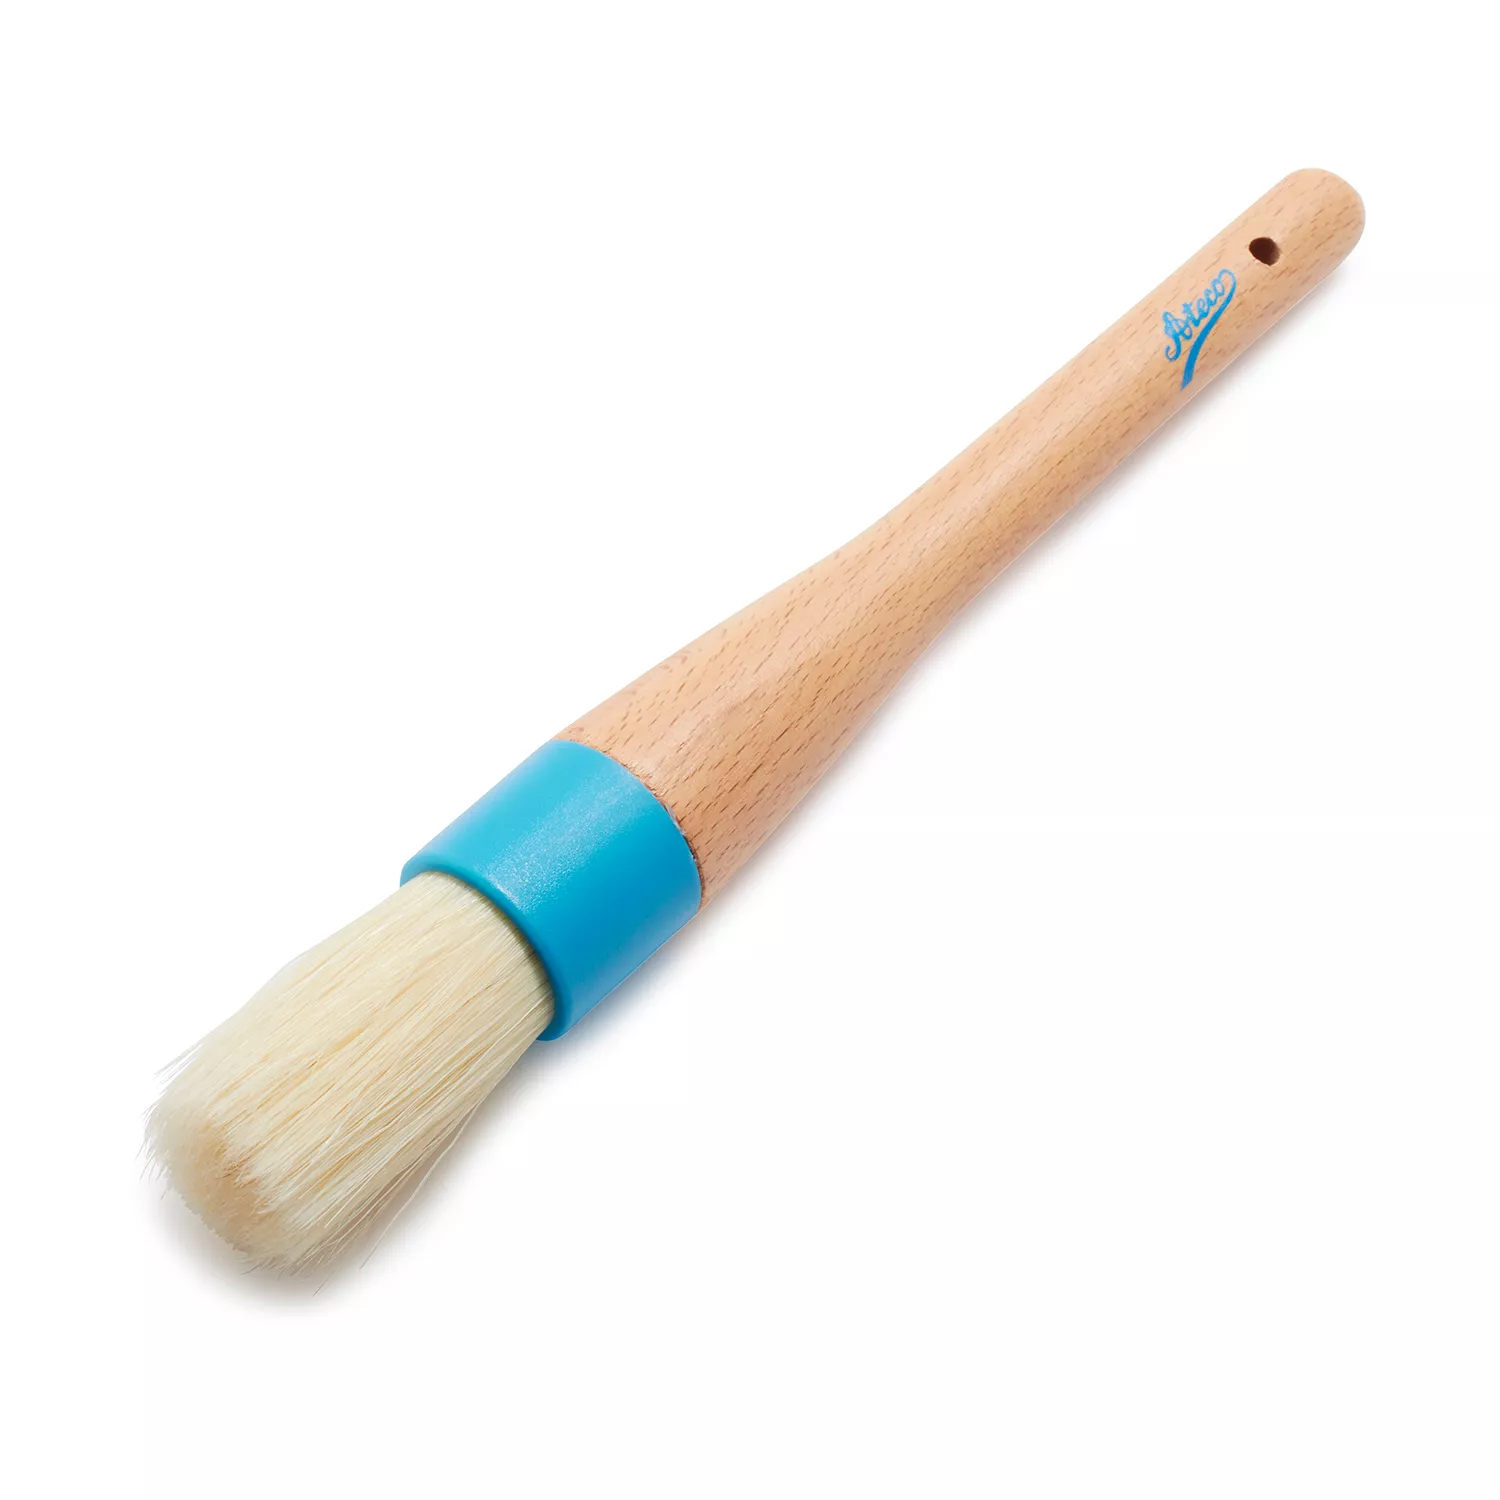 Le Creuset Silicone Pastry Brush, 6 3/4 x 1 1/8, White